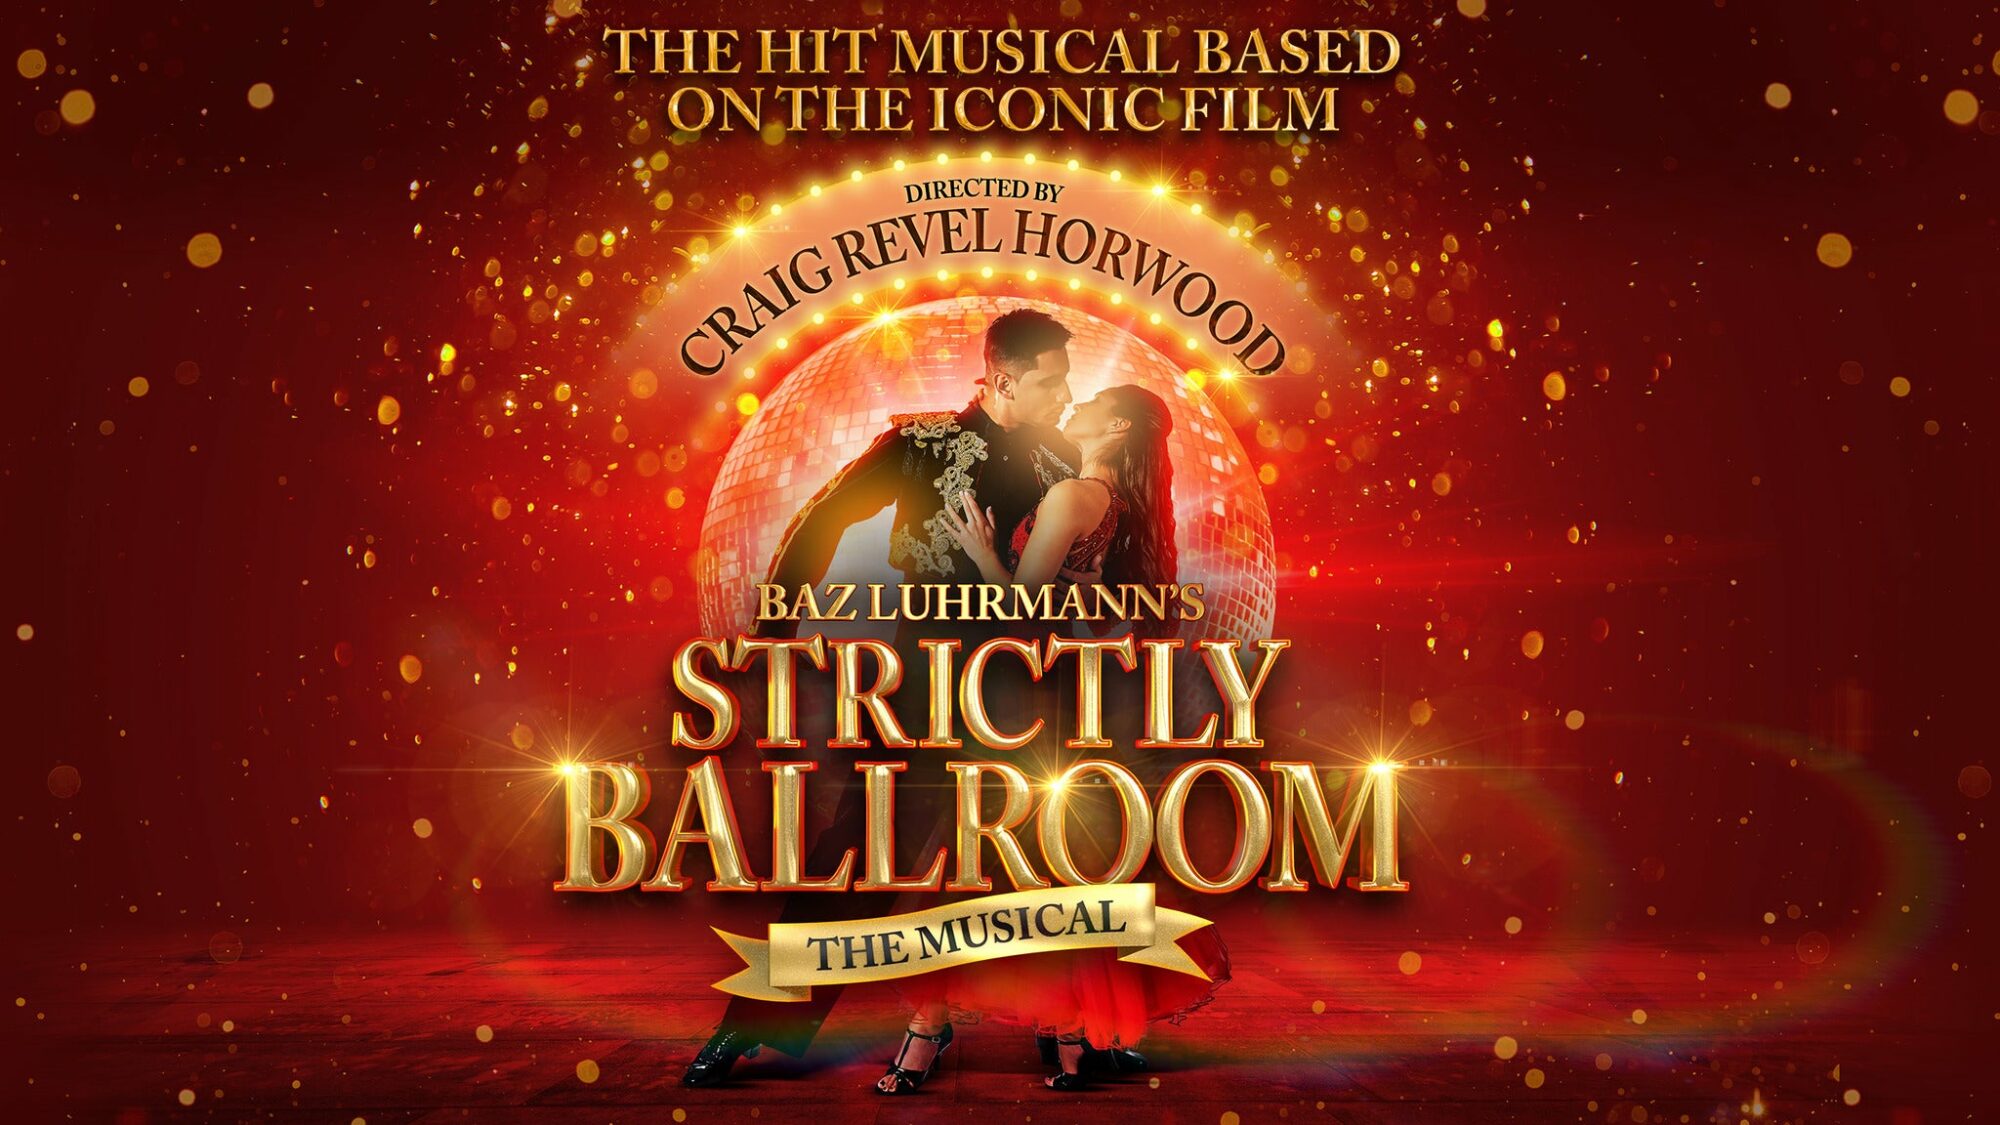 Image name Strictly Ballroom The Musical at Hull New Theatre Hull the 30 image from the post Events in Yorkshire.com.